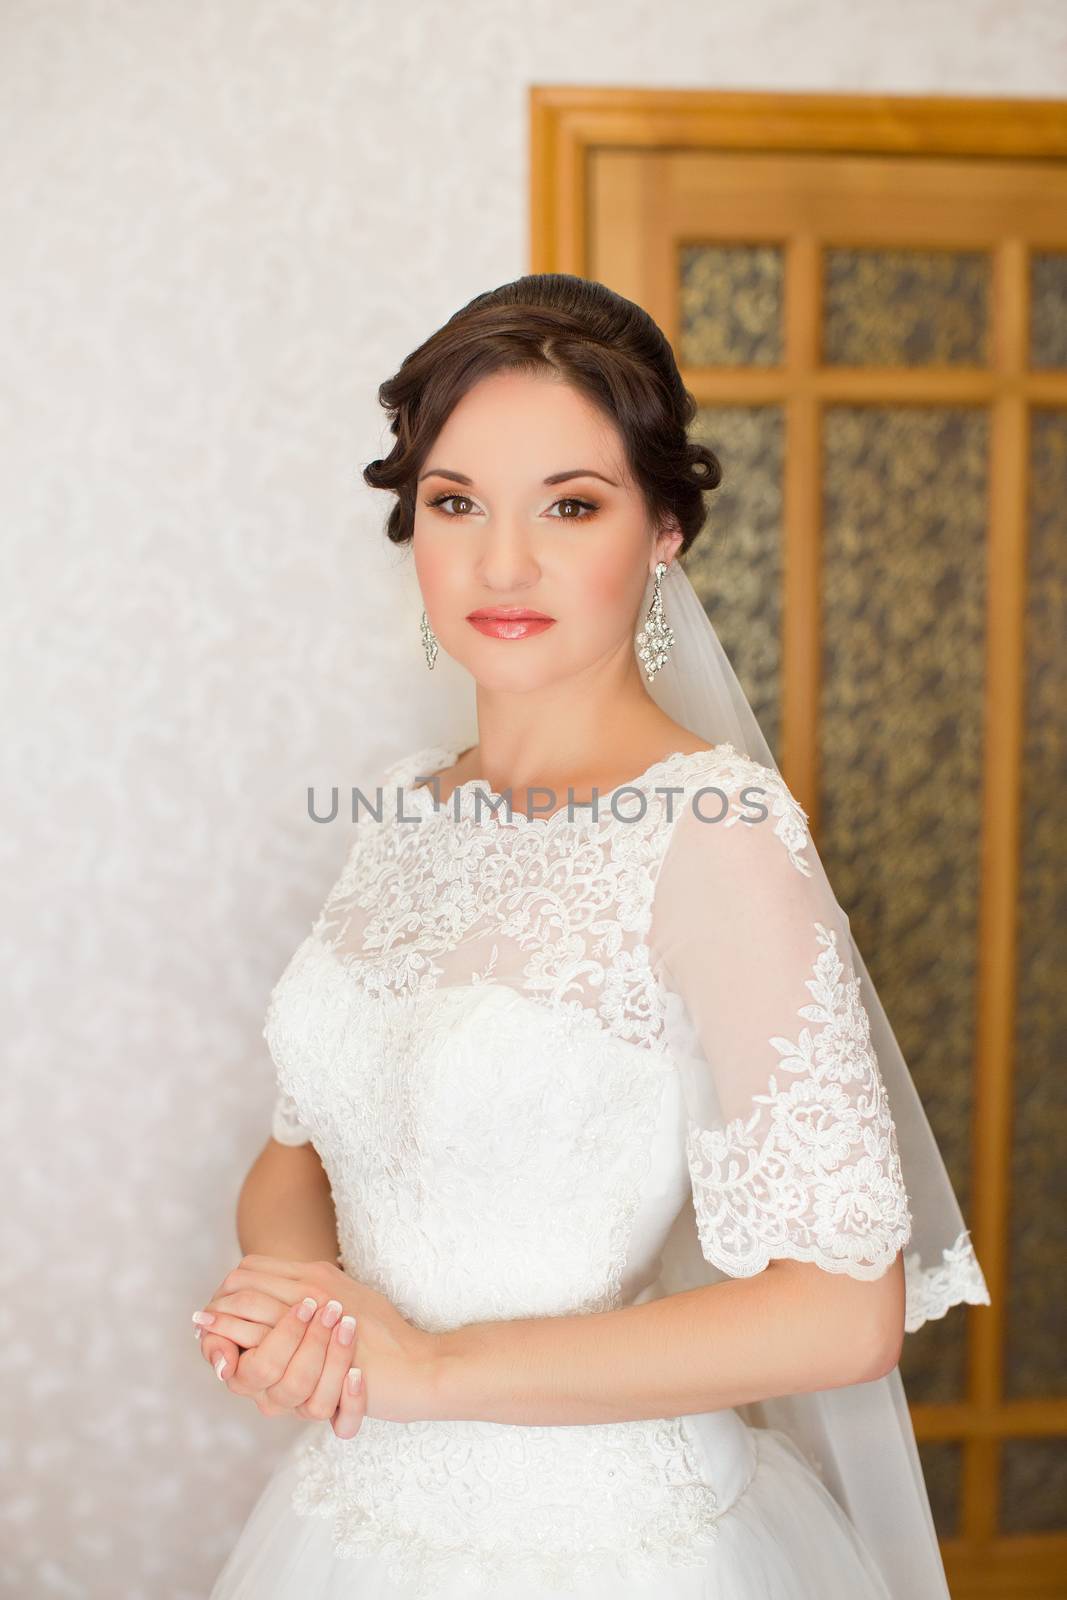 Bride with red lipstick on the lips